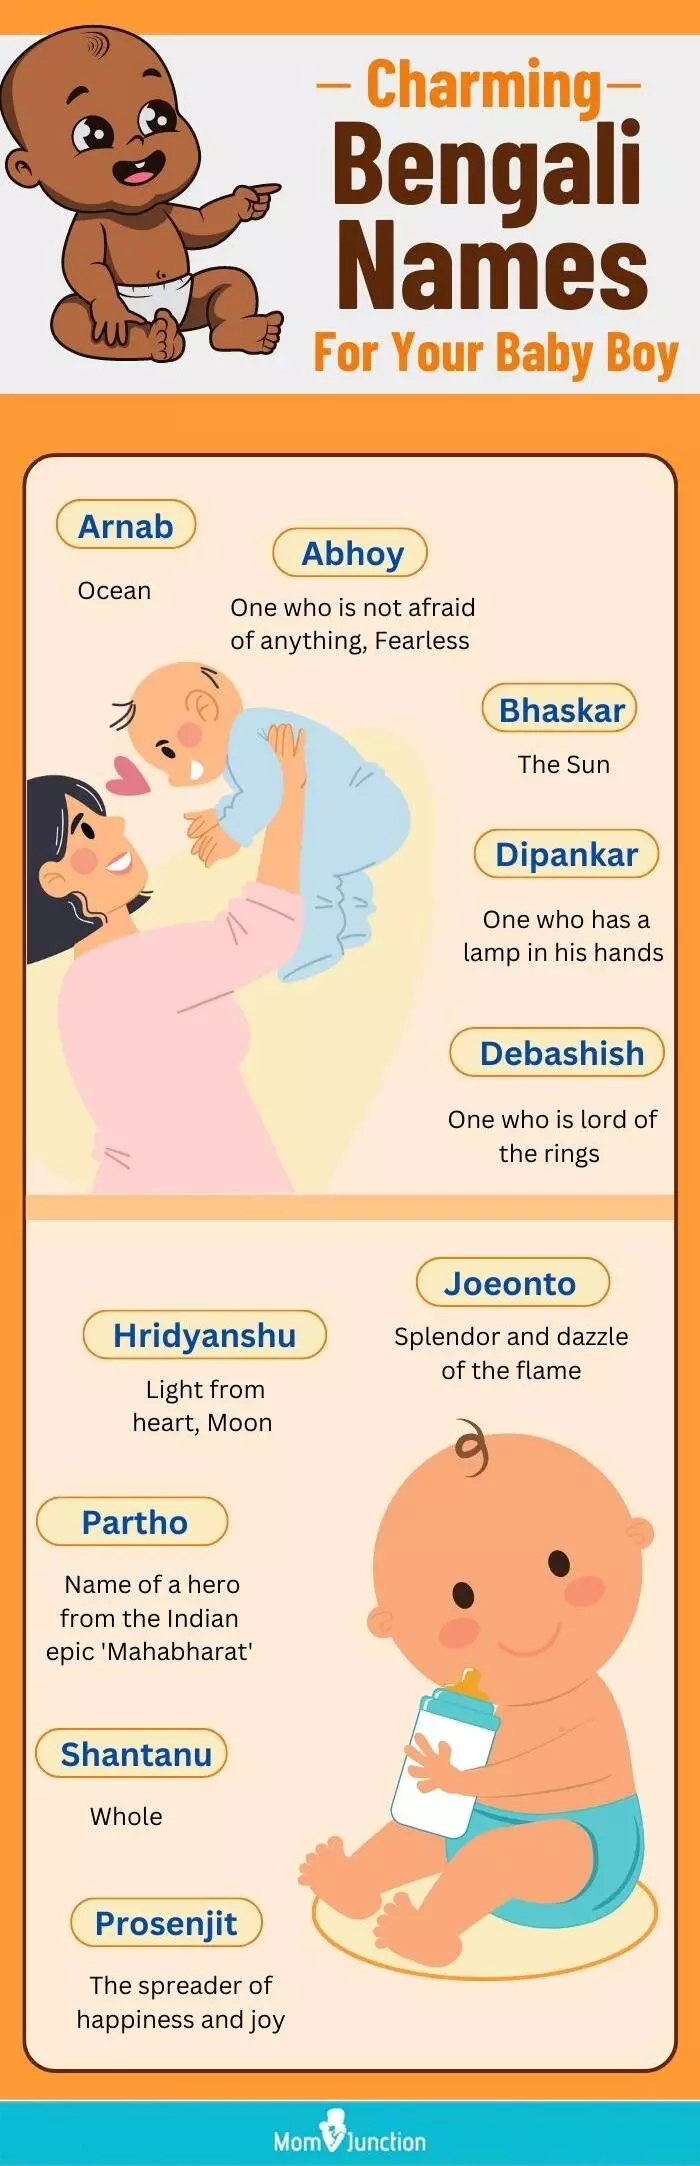 charming bengali names for your baby boy (infographic)